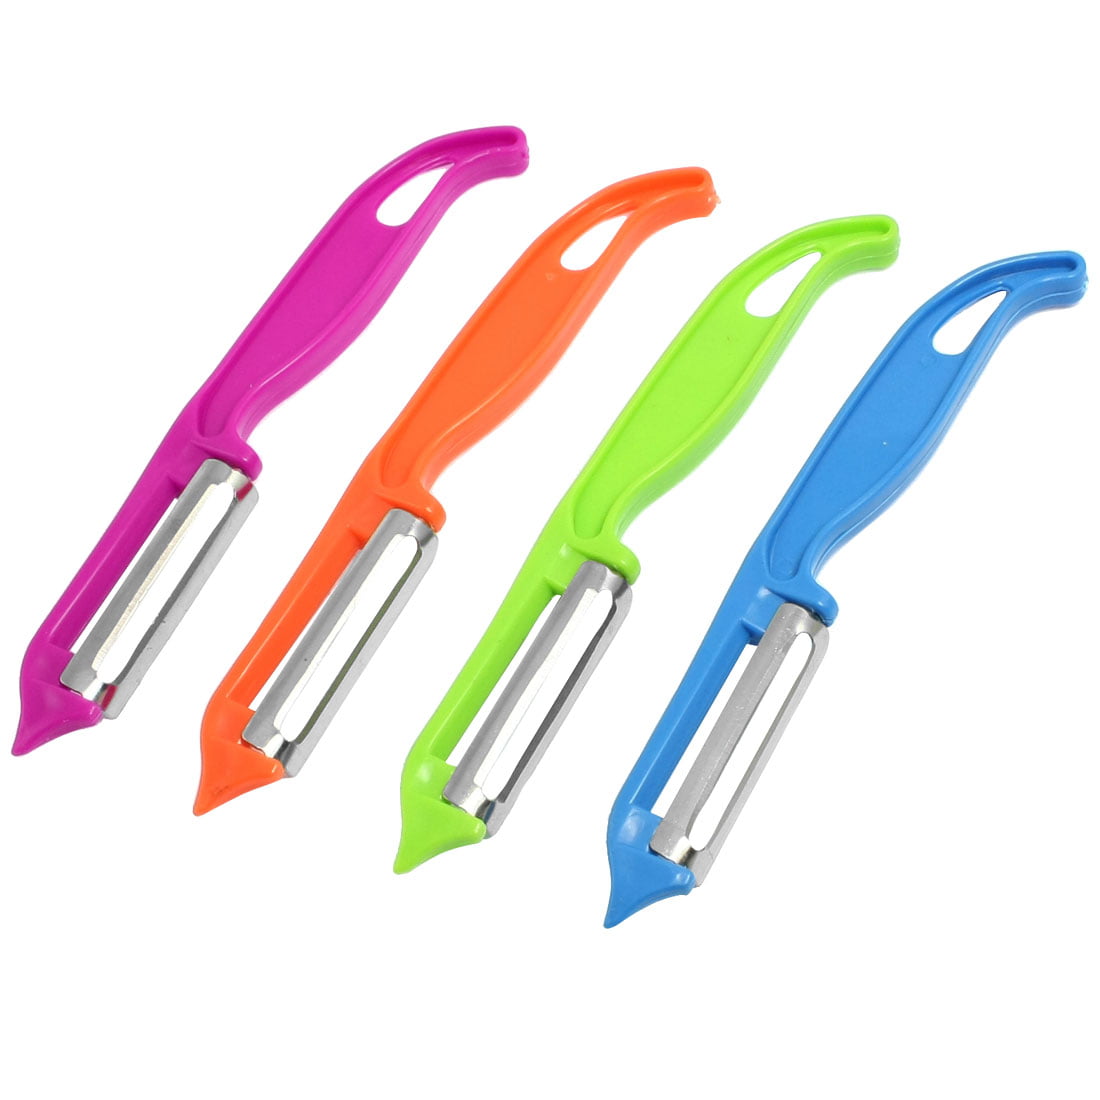 Details about   5.5" L Swivel Sharp Stainless Steel Peeler Kitchen Vegetable Peelers